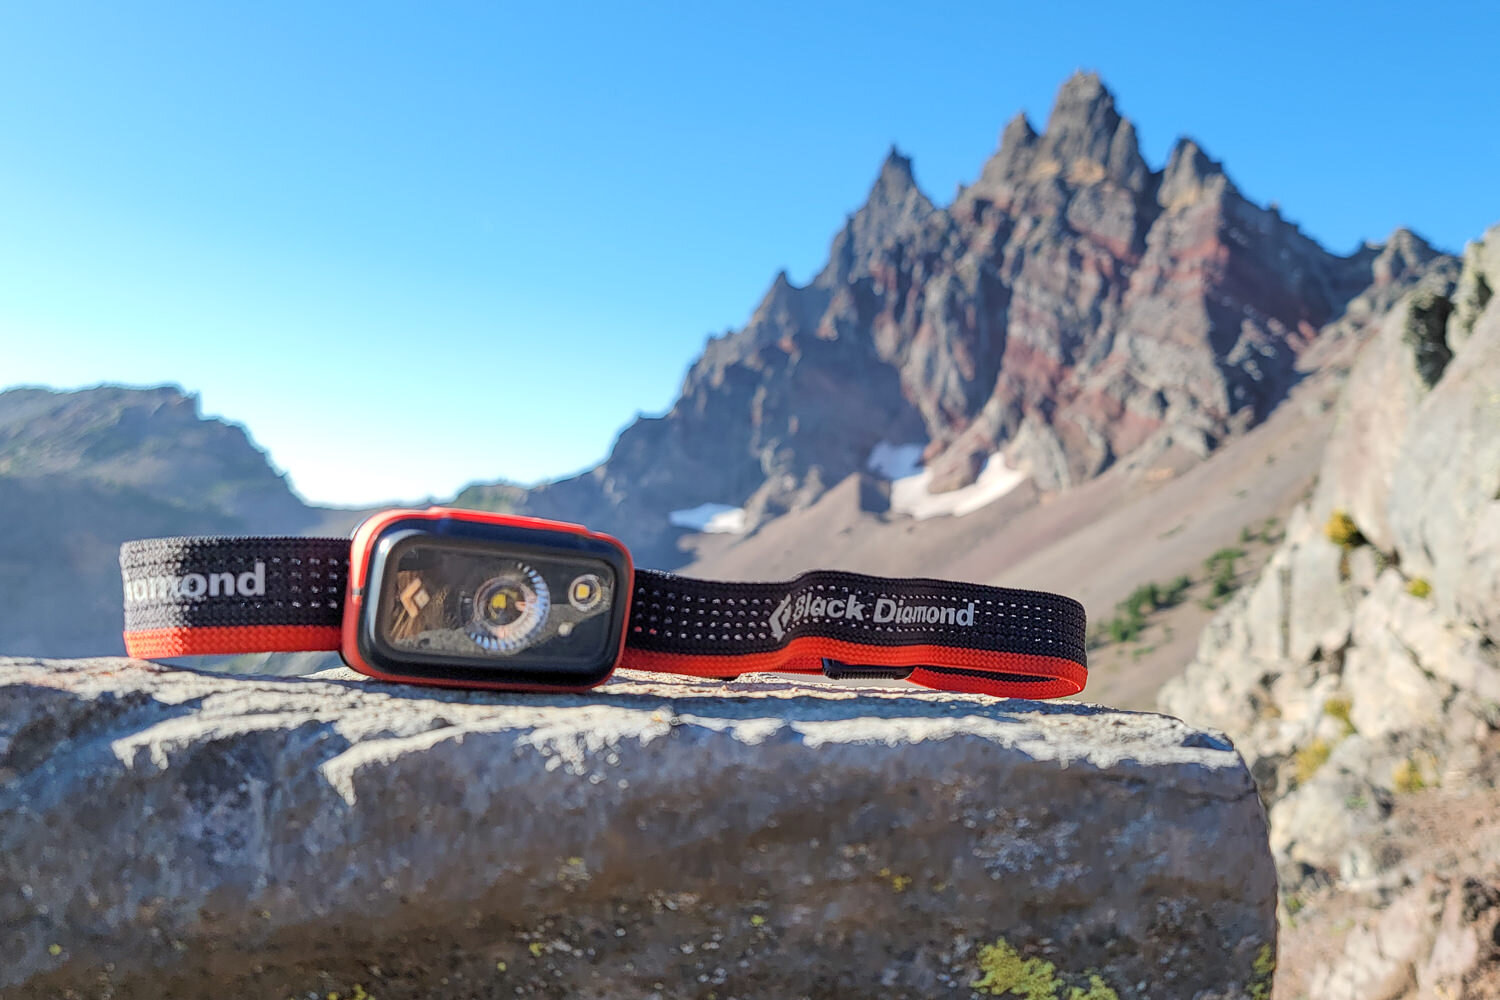 The Black Diamond Spot 350 Headlamp is a great value with practical bells & whistles we appreciate